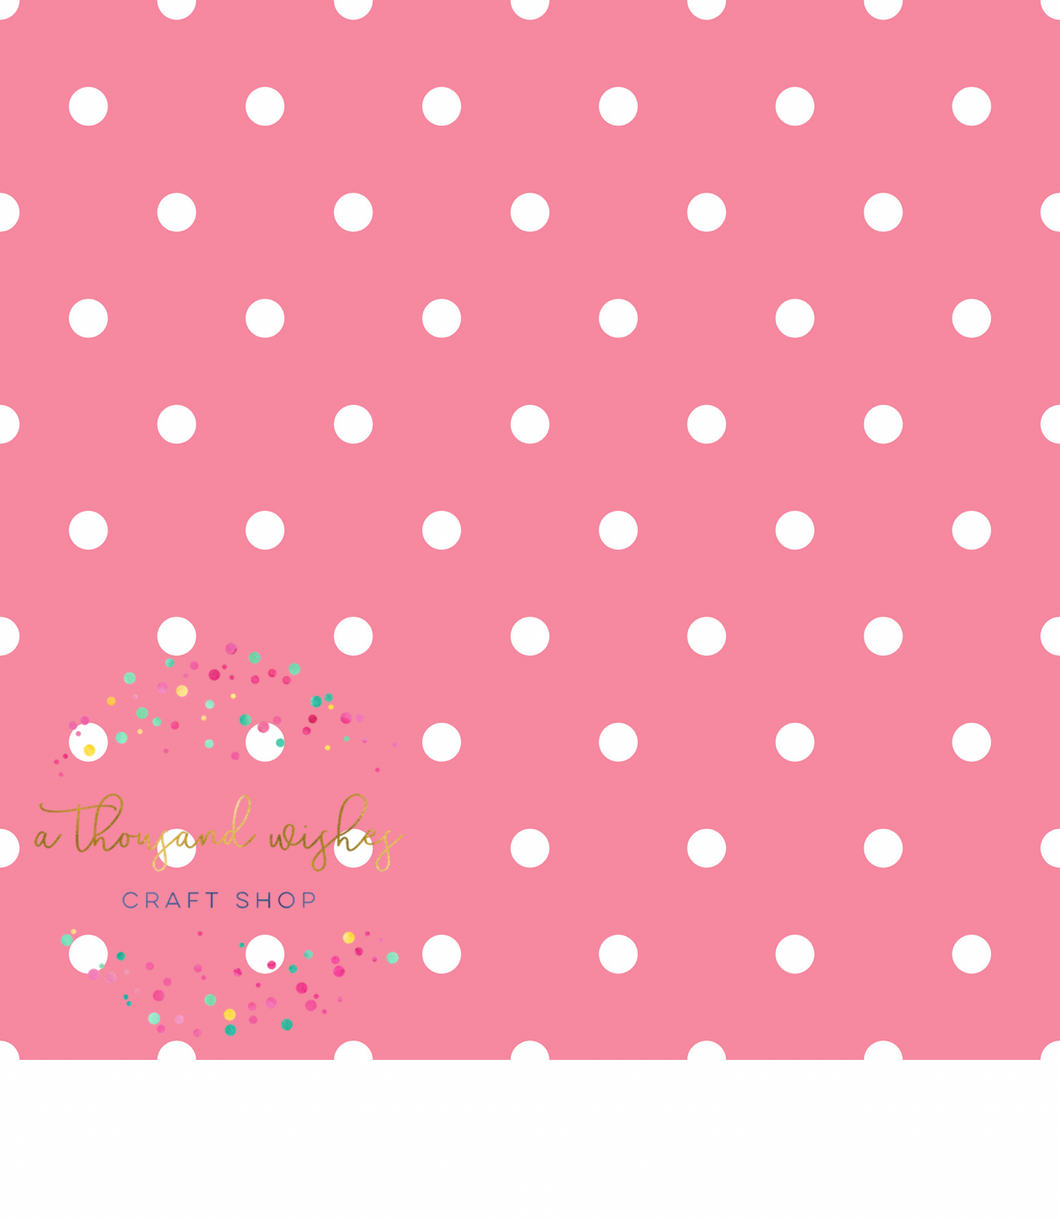 [CATE & RAINN] PINK POLKA DOT - Avaleigh Bright Floral Collection